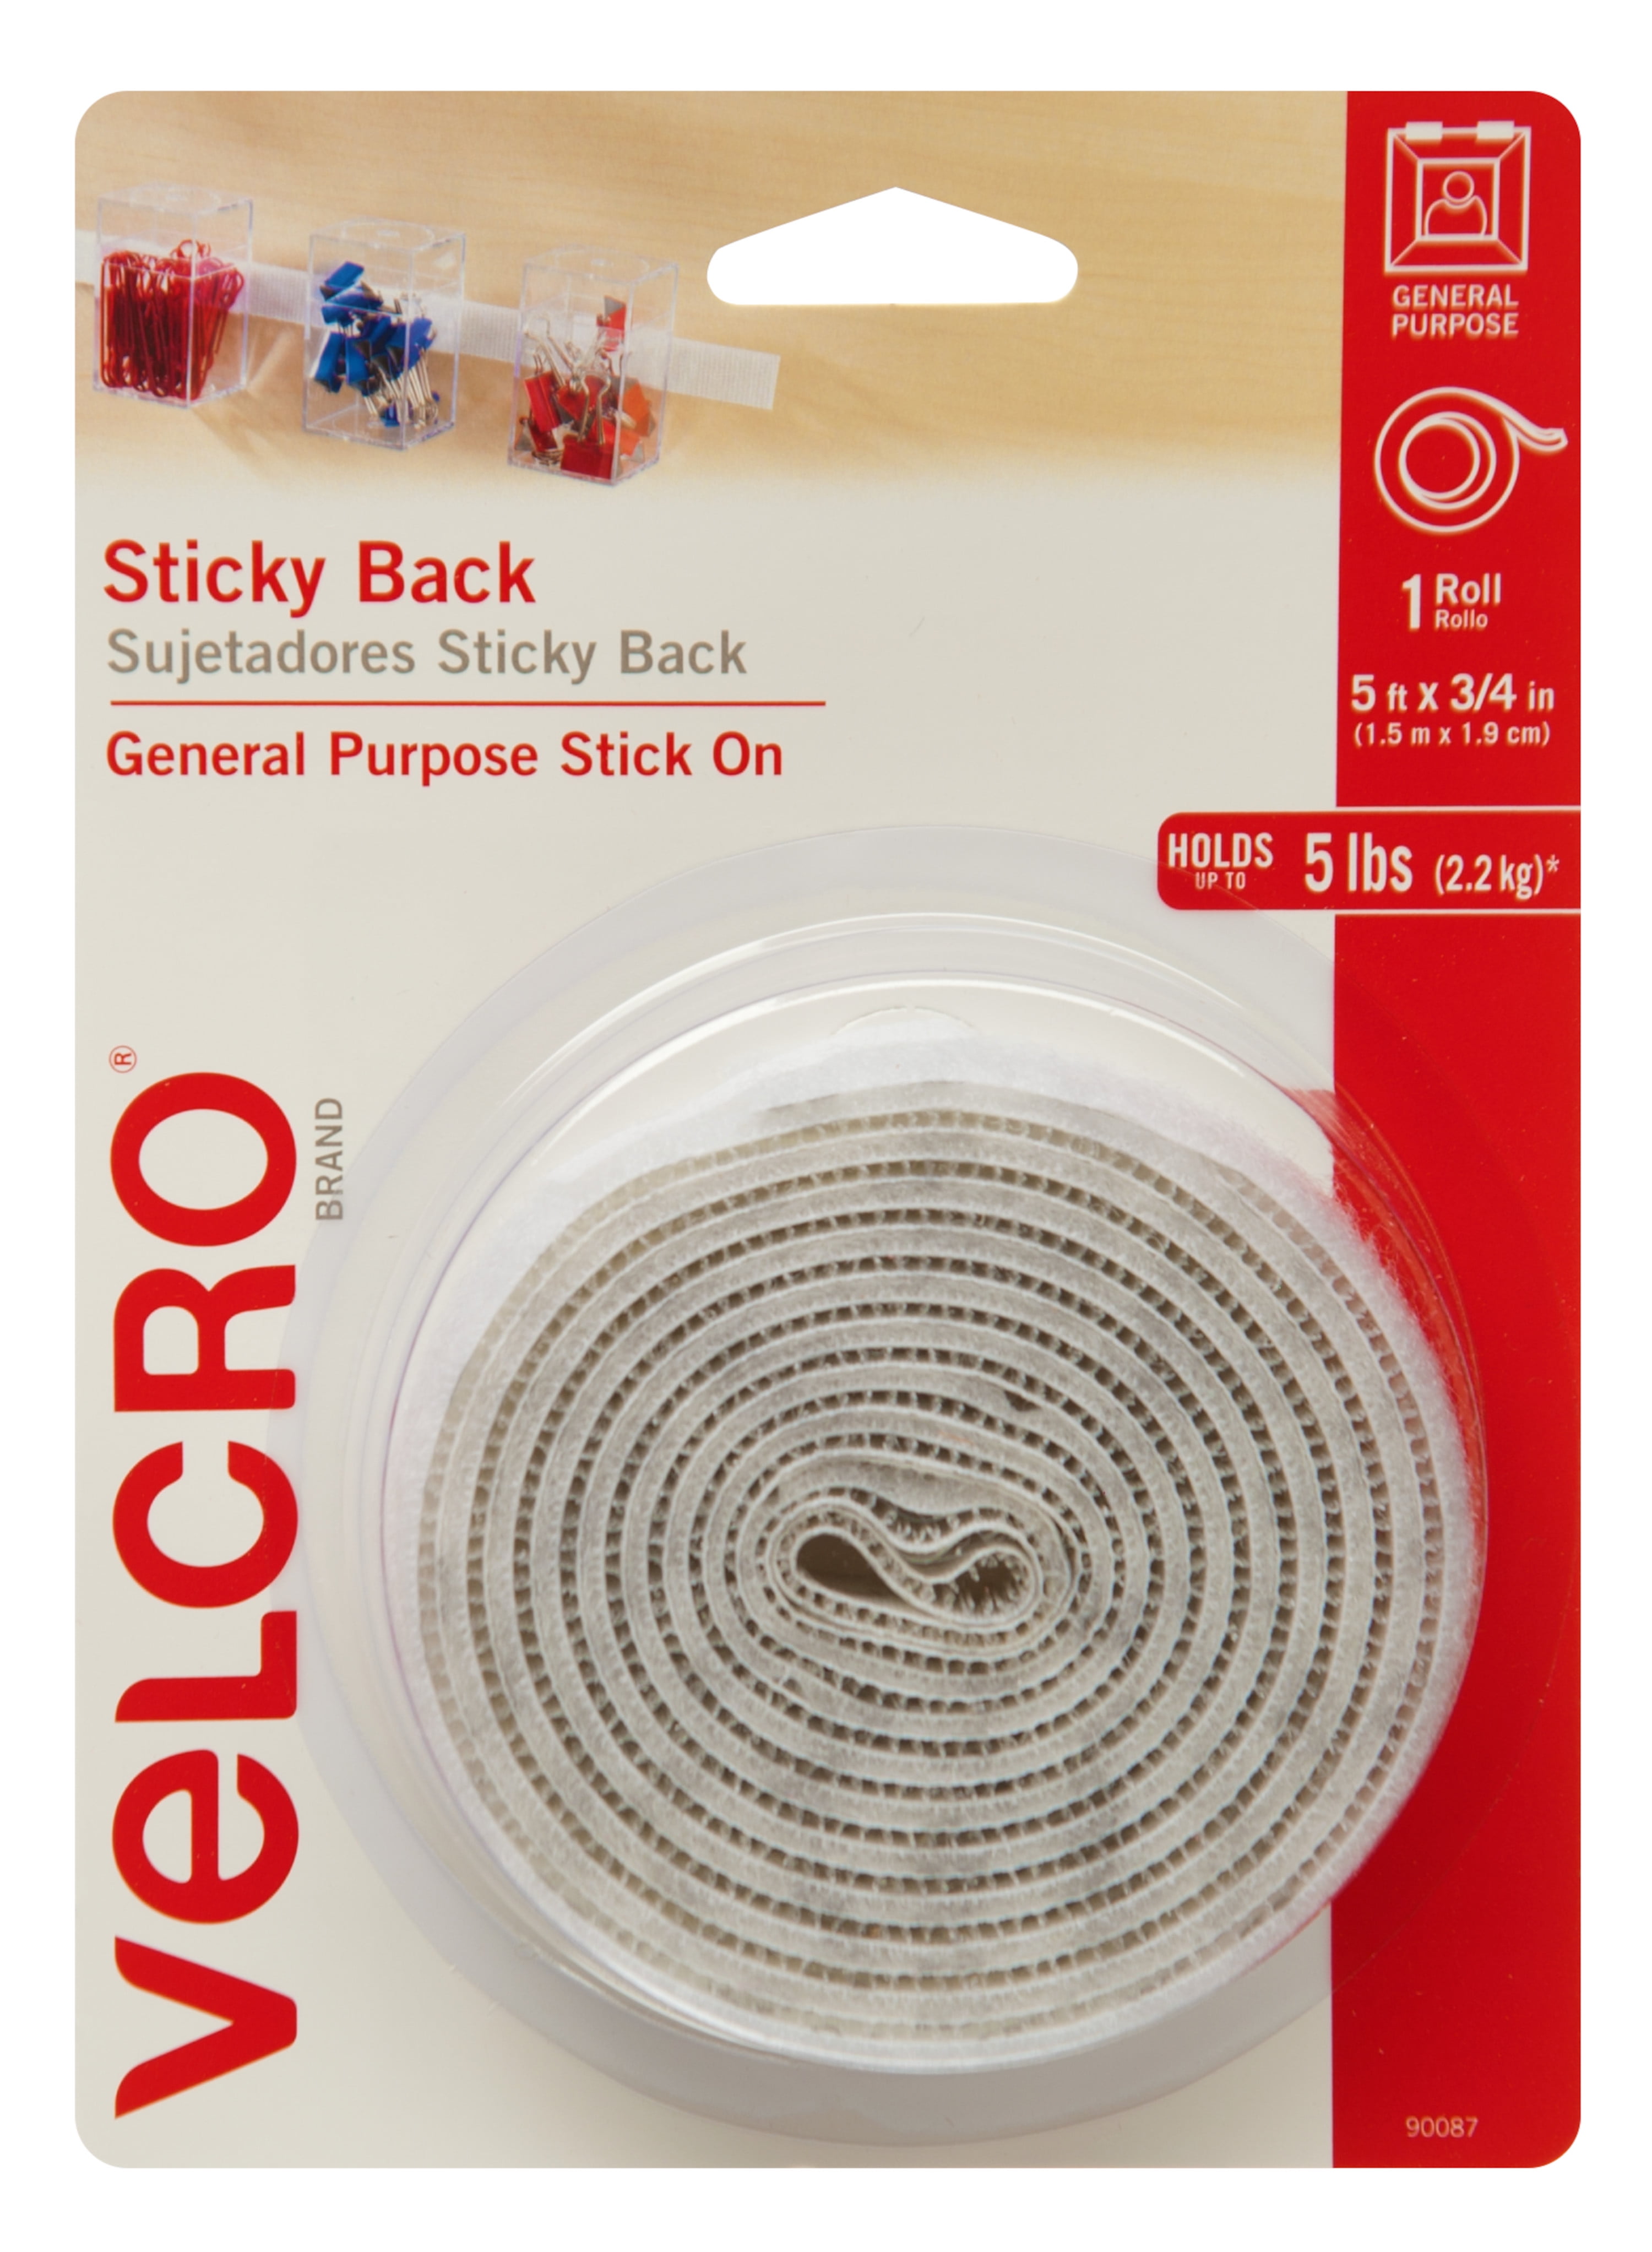 Velcro Brand Sticky Back Adhesive Tape 5 feet x 3/4 inches Roll White